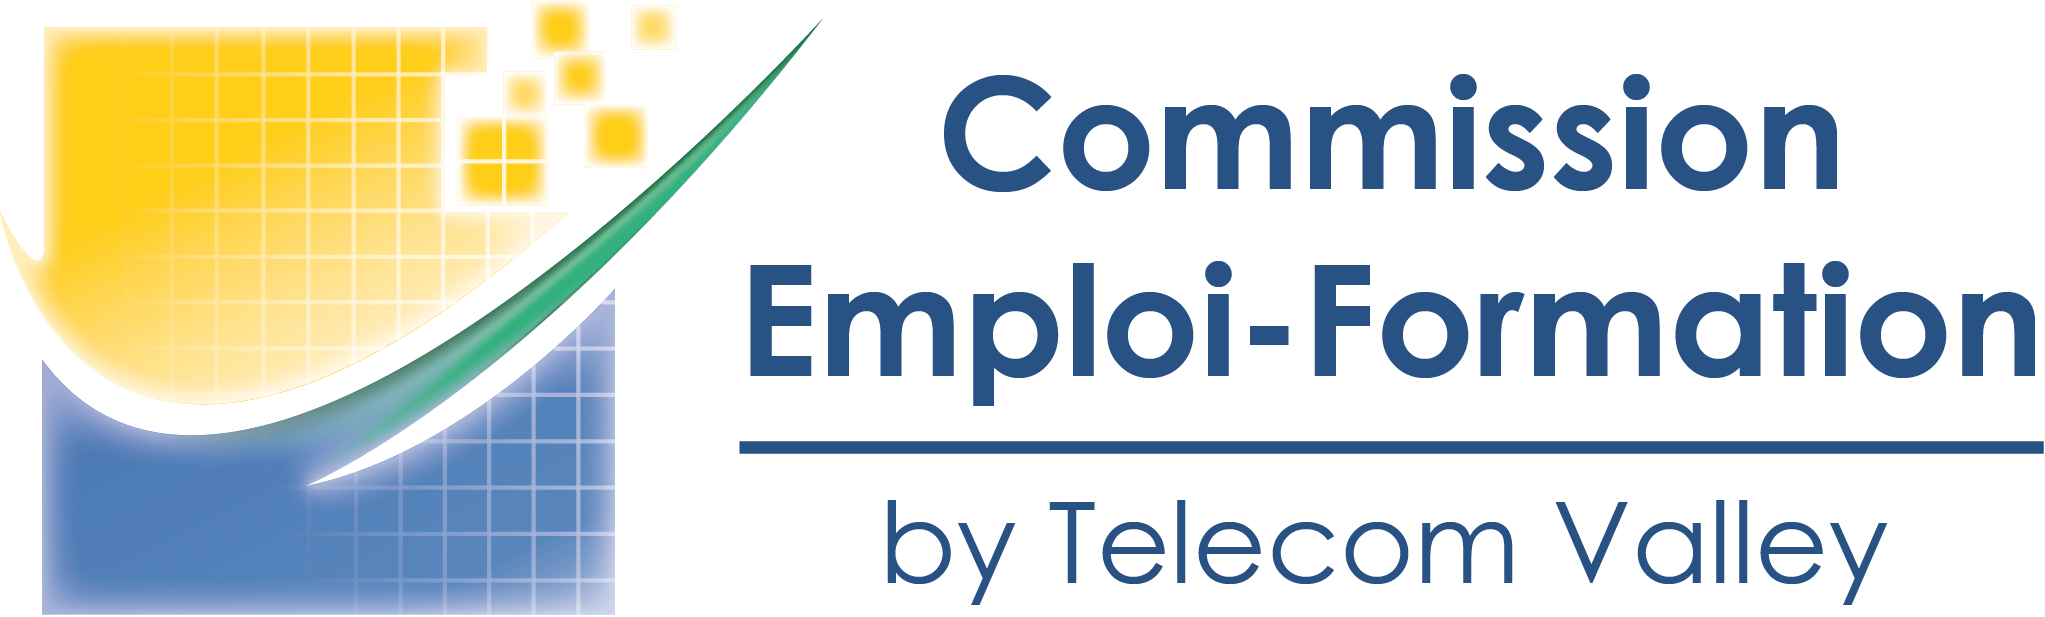 4 avril – Commission Emploi-Formation